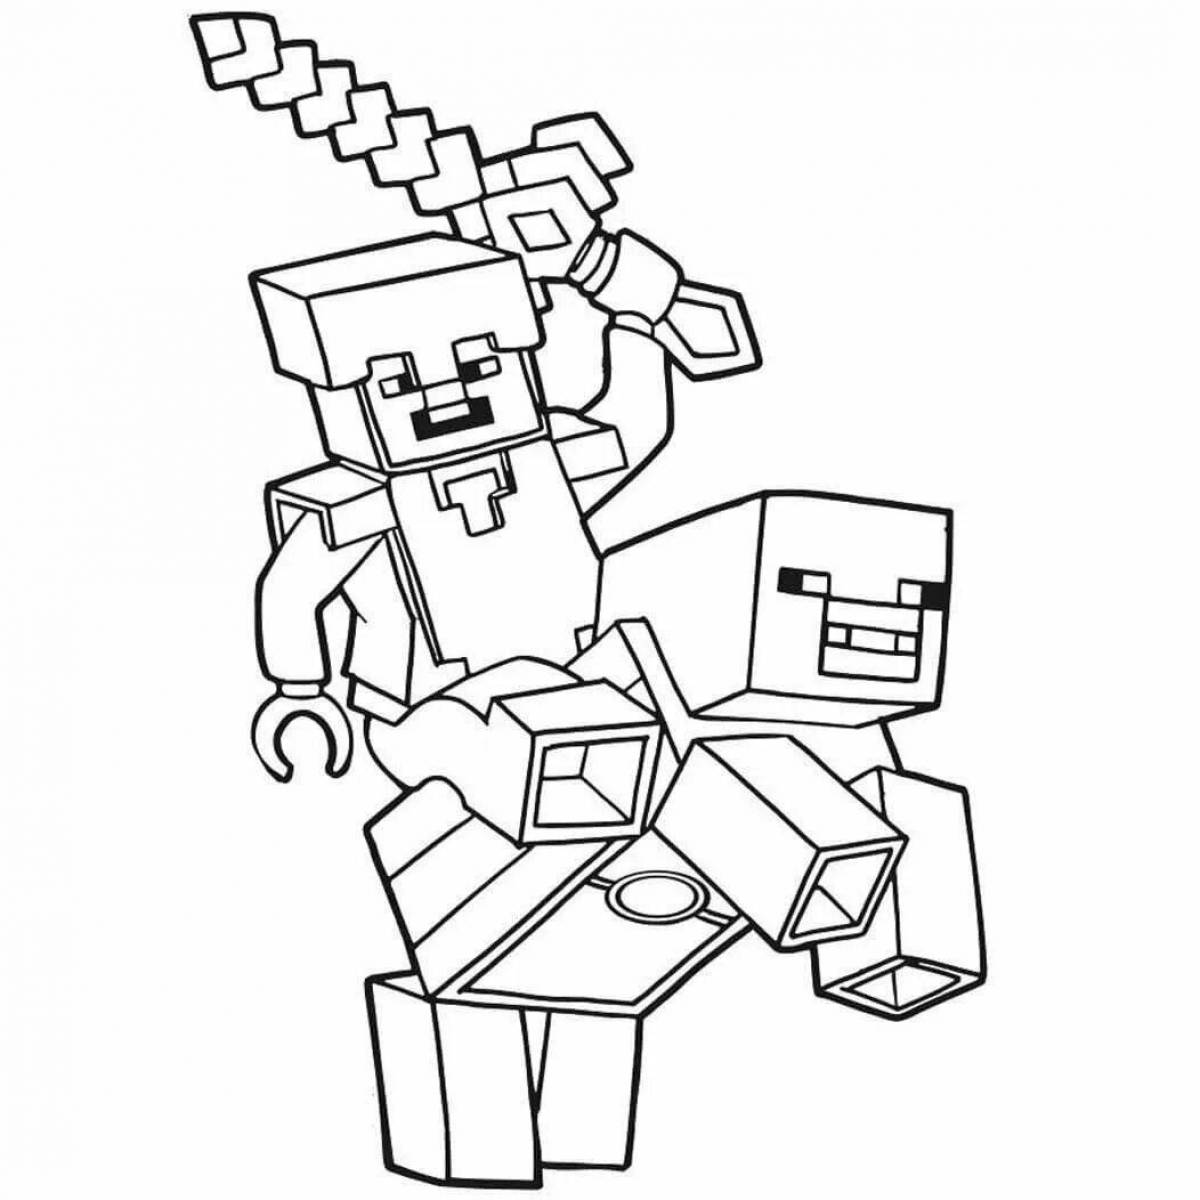 Colorful minecraft coloring book for boys 6-7 years old